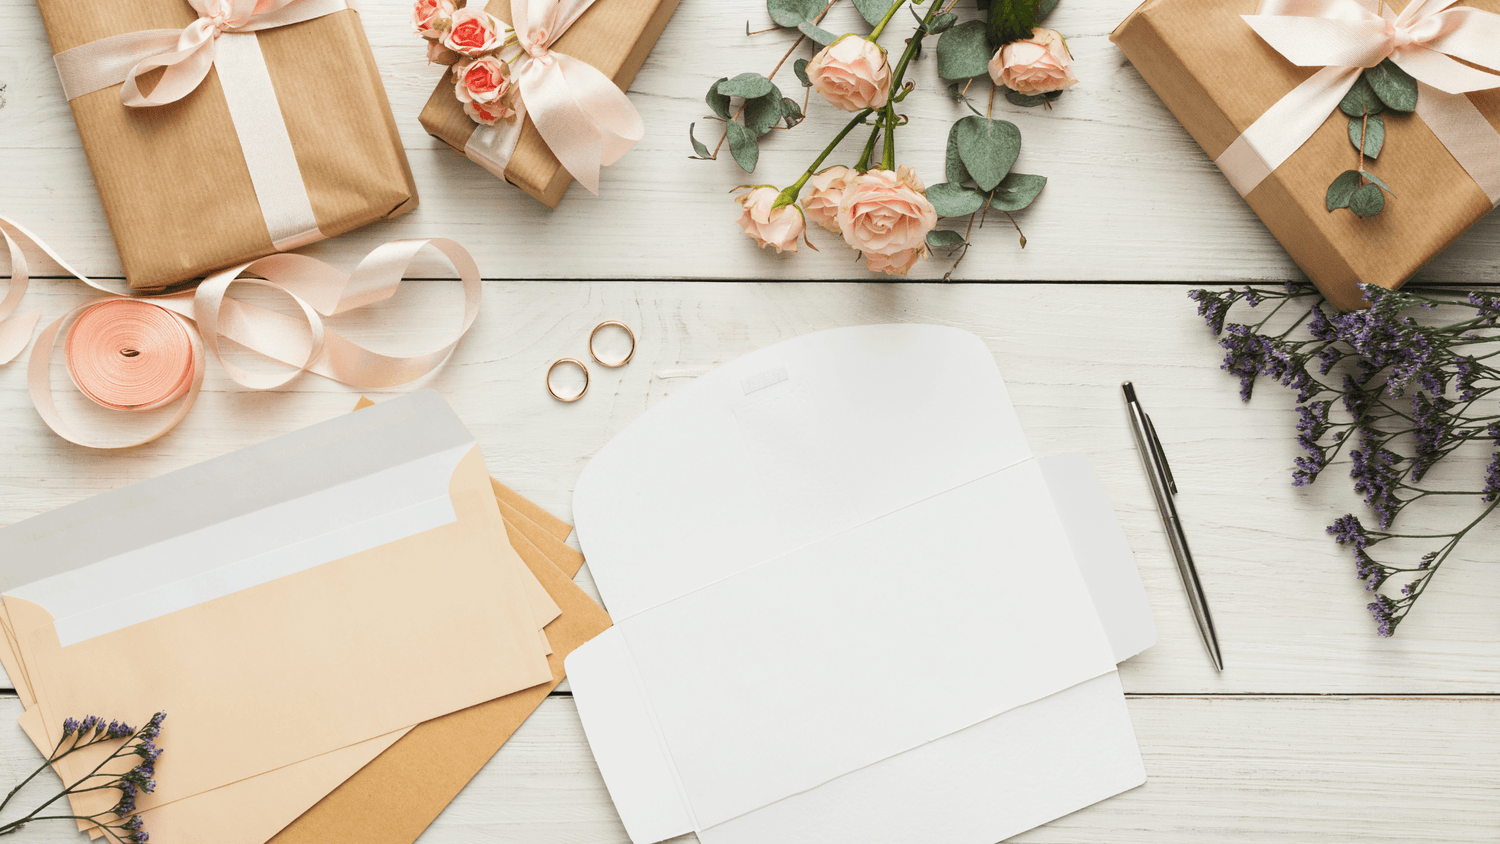 The 5 Steps Guide to your Personalised Wedding Invitations - Hoesh International Ltd